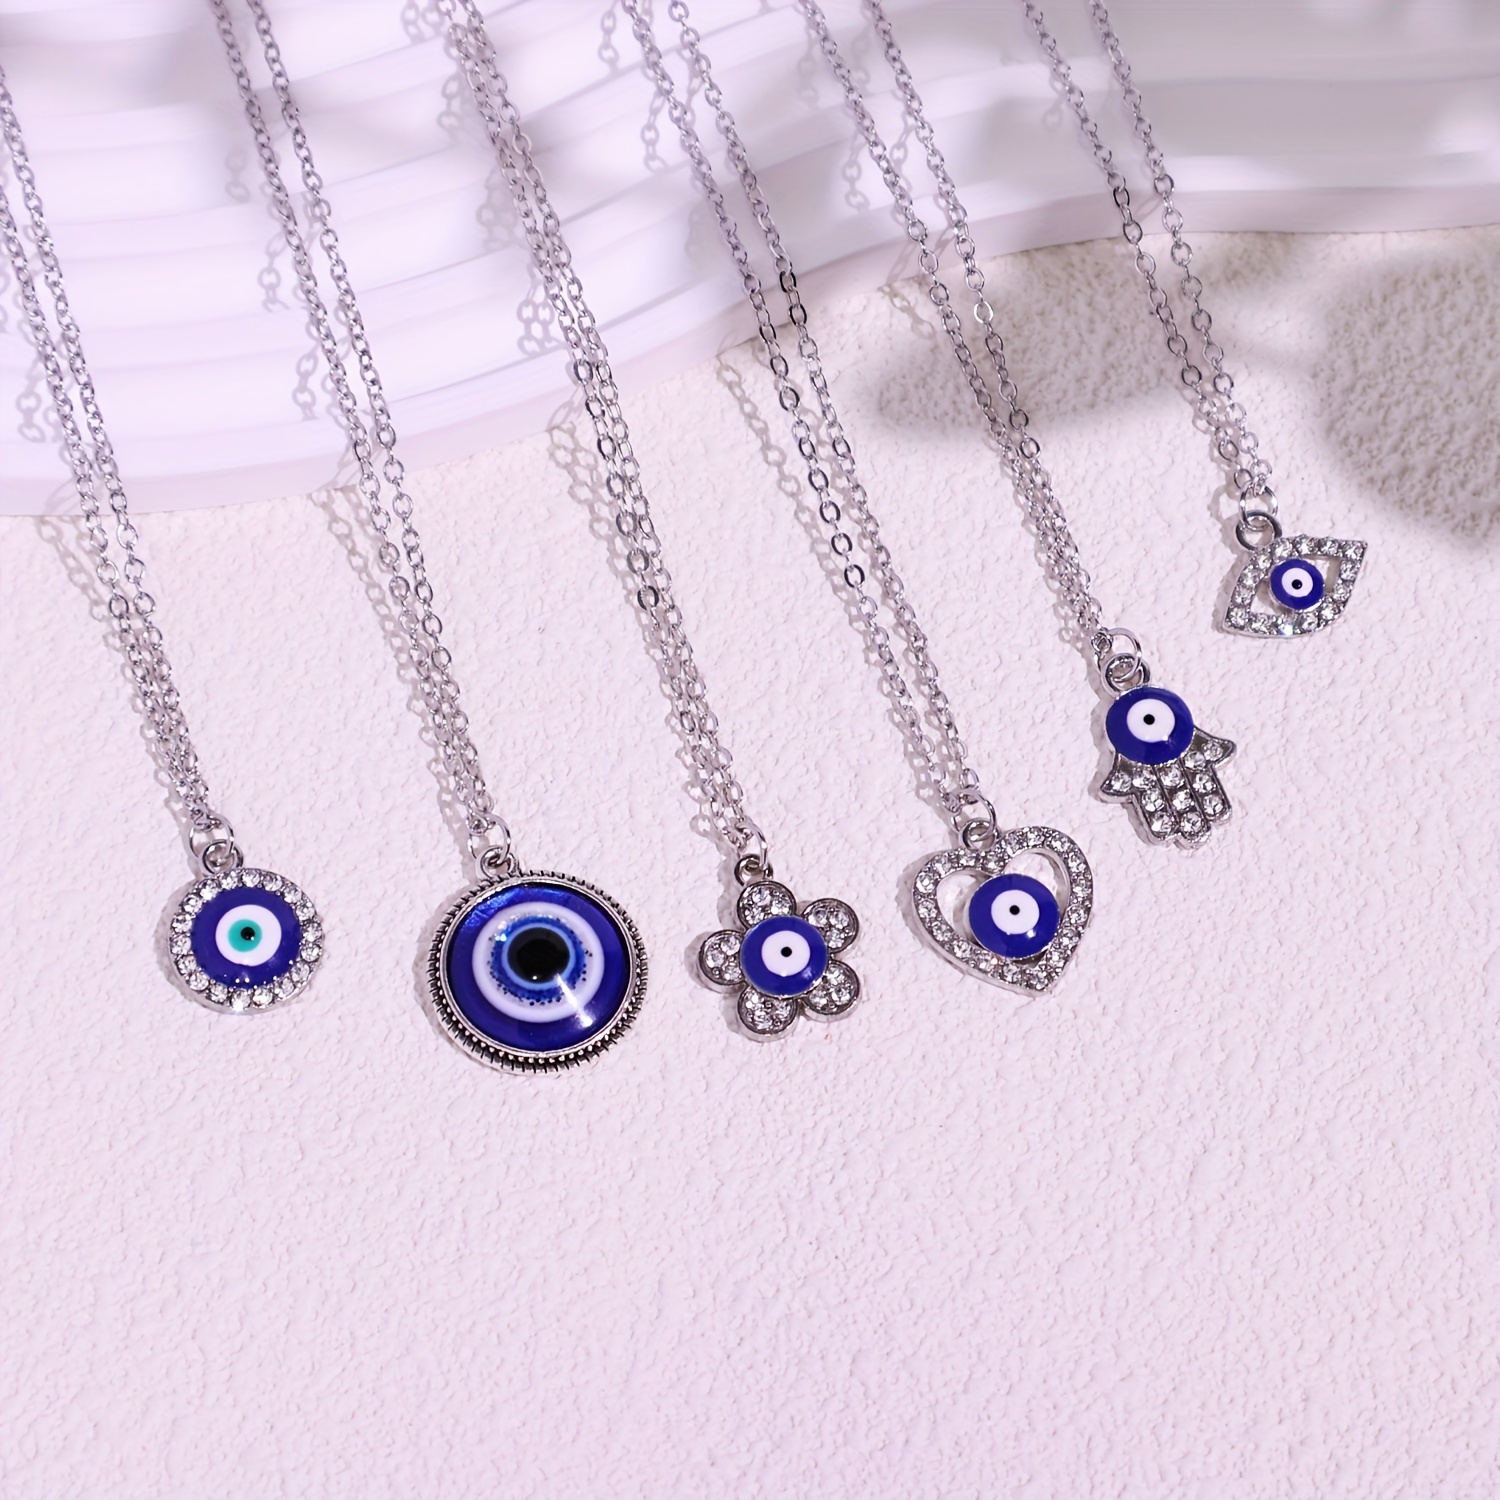 

6pcs/set Exquisite Evil's Eye Necklace Turkish Blue Eye Hand Pendant Necklace Lucky Protection Jewelry Gift For Ladies